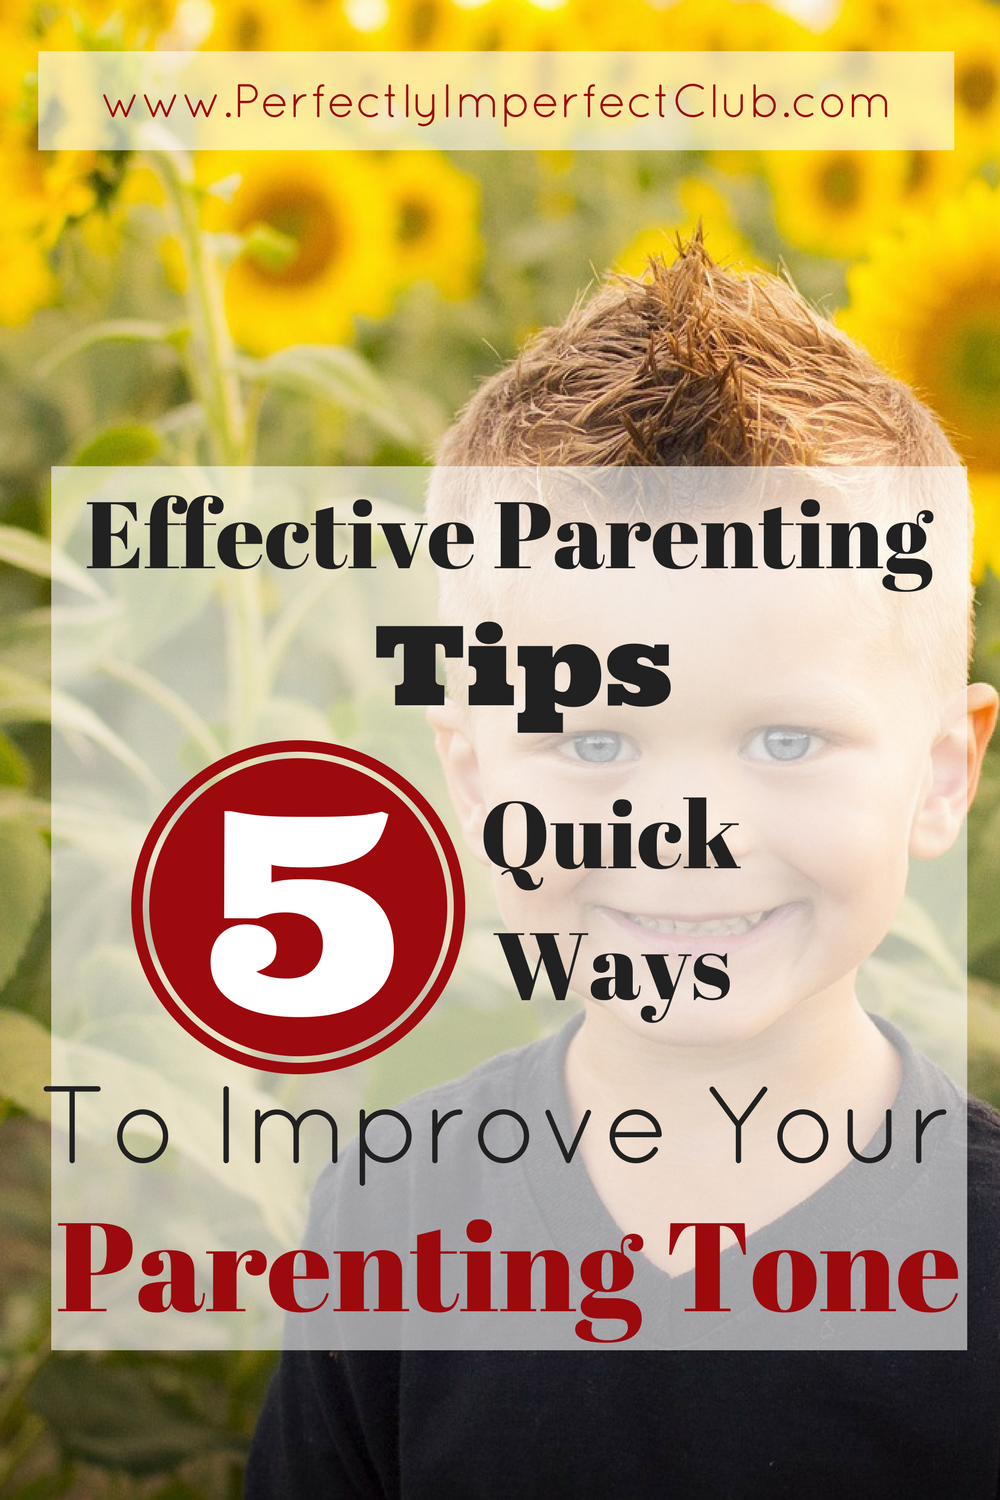 Effective Parenting Tips: 5 Quick Ways to Improve Your Parenting Tone